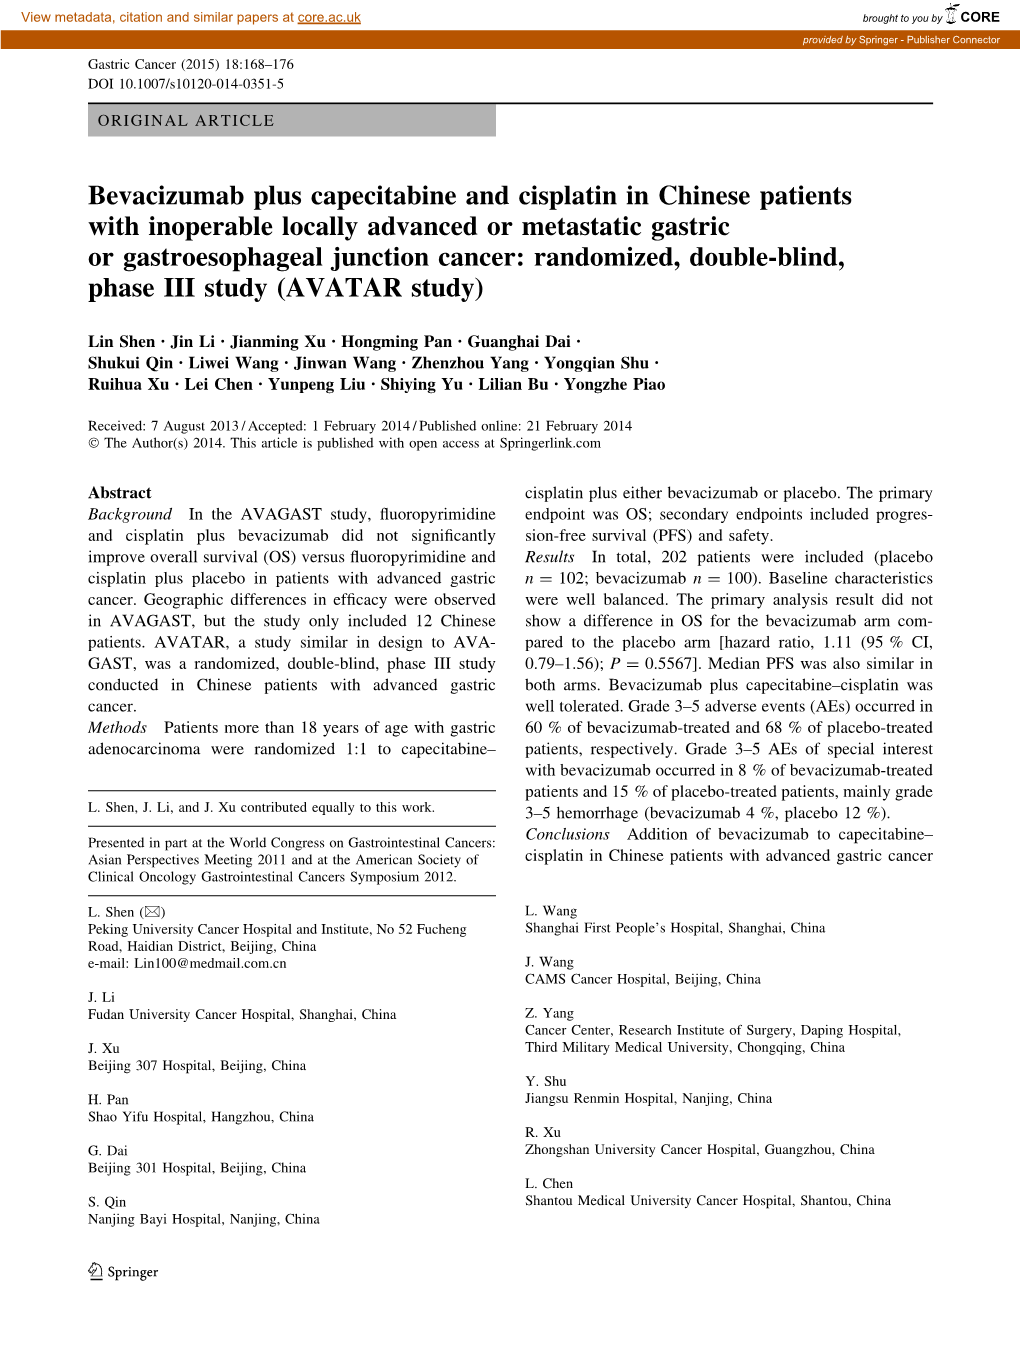 Bevacizumab Plus Capecitabine and Cisplatin in Chinese Patients With